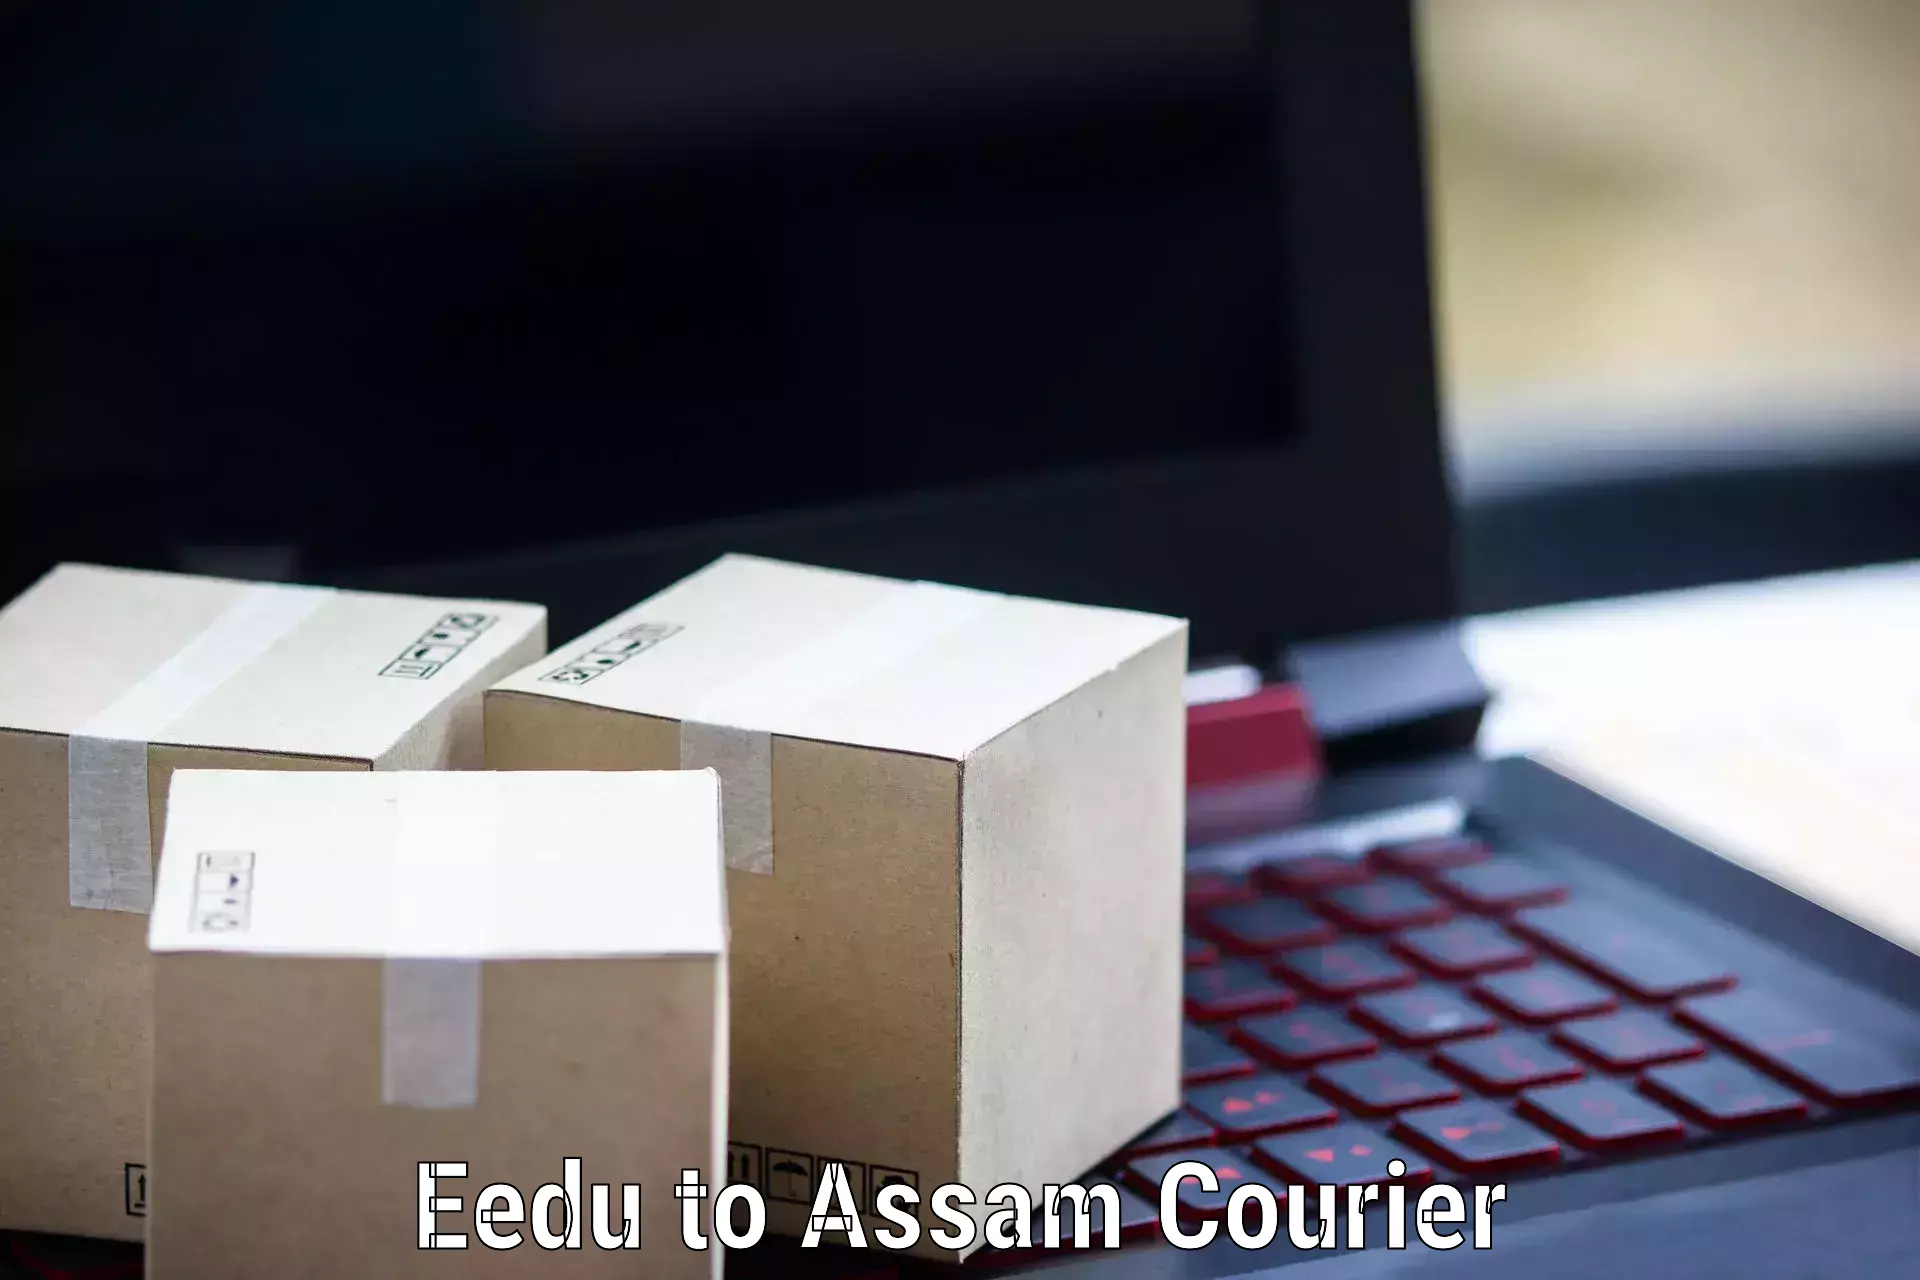 Easy access courier services in Eedu to Teok